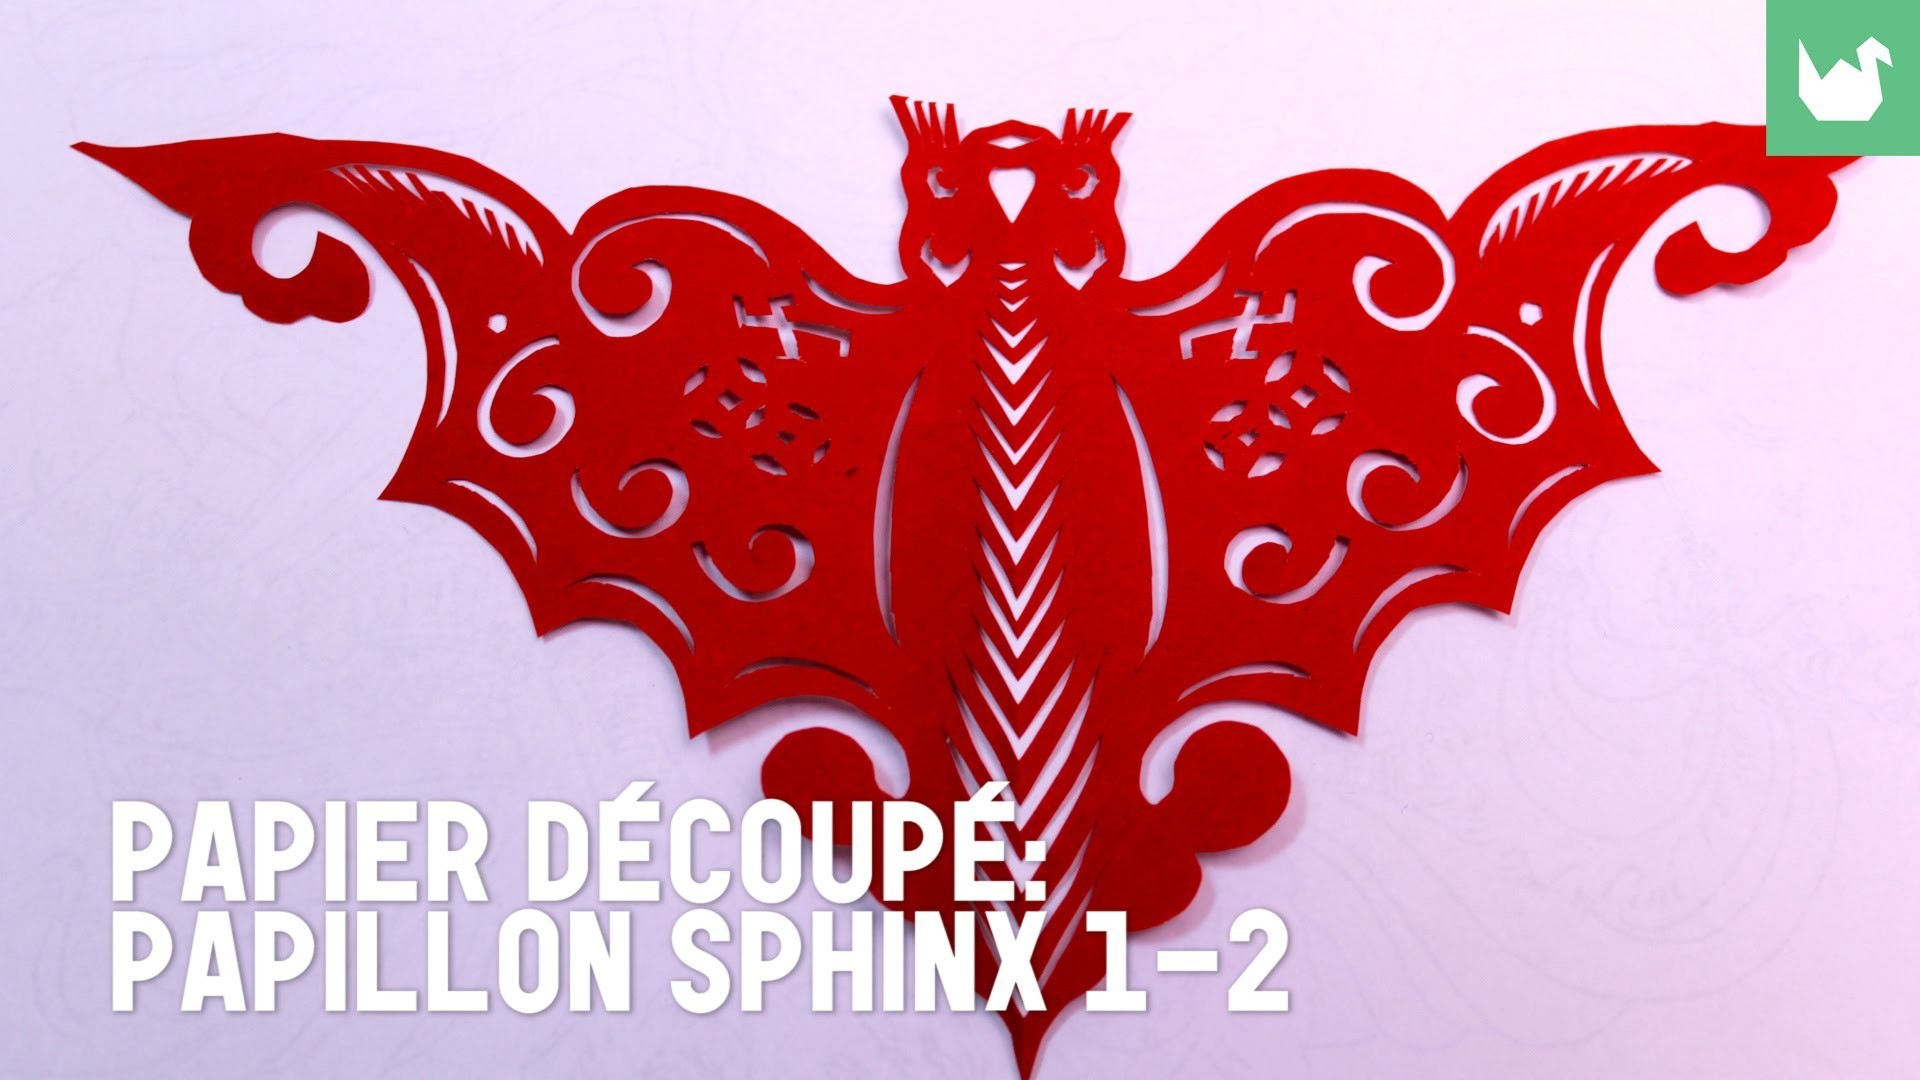 Découpage traditionnel chinois : Papillon Sphinx 1-2 - HD